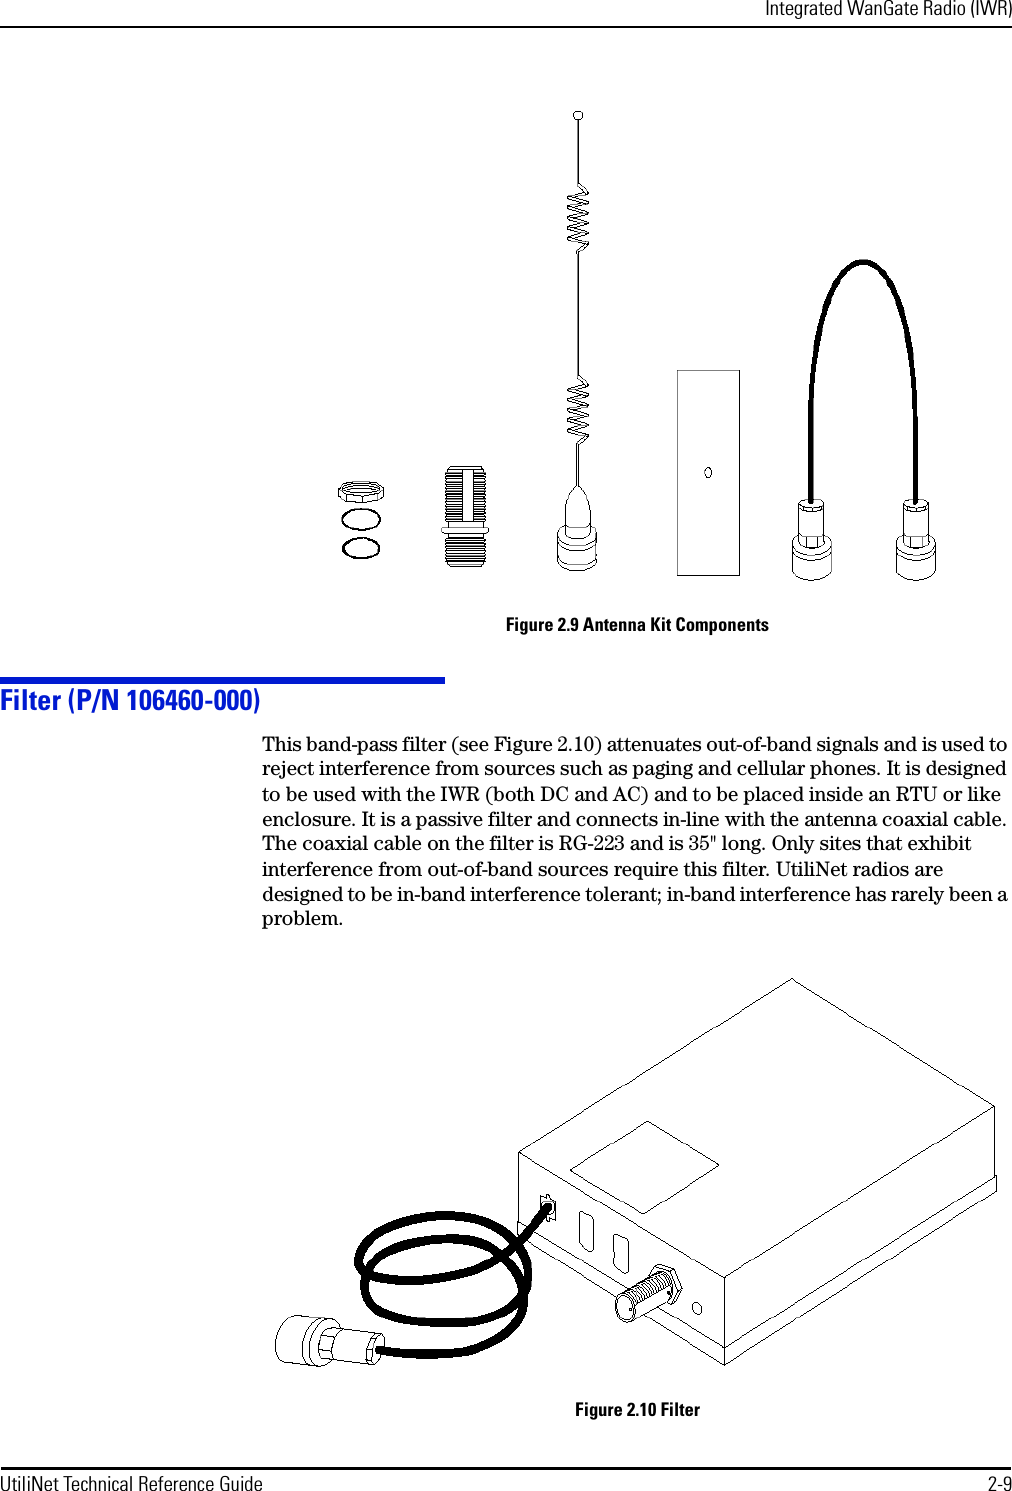 Integrated WanGate Radio (IWR)UtiliNet Technical Reference Guide 2-9Figure 2.9 Antenna Kit ComponentsFilter (P/N 106460-000)This band-pass filter (see Figure 2.10) attenuates out-of-band signals and is used to reject interference from sources such as paging and cellular phones. It is designed to be used with the IWR (both DC and AC) and to be placed inside an RTU or like enclosure. It is a passive filter and connects in-line with the antenna coaxial cable. The coaxial cable on the filter is RG-223 and is 35&quot; long. Only sites that exhibit interference from out-of-band sources require this filter. UtiliNet radios are designed to be in-band interference tolerant; in-band interference has rarely been a problem.Figure 2.10 Filter